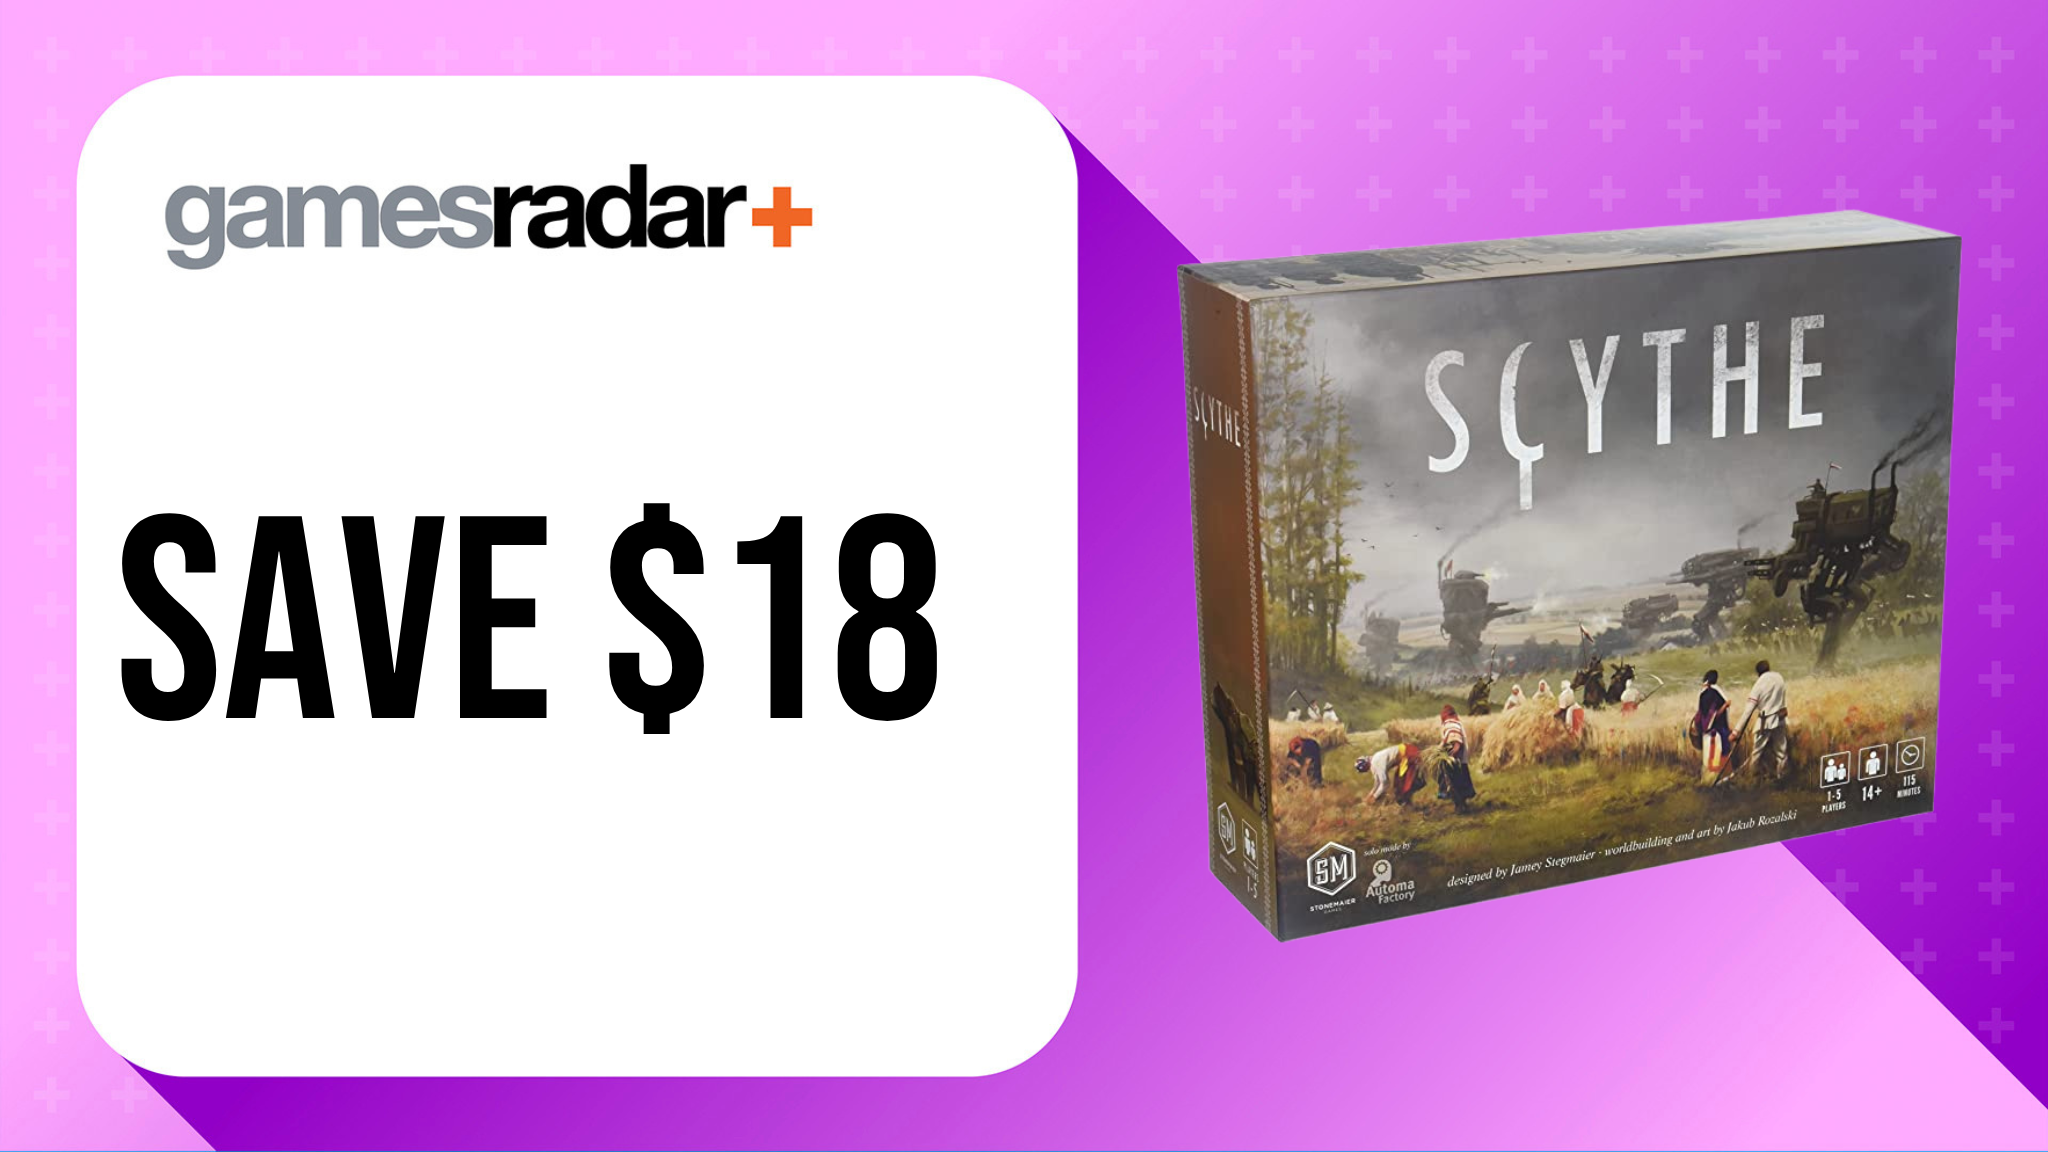 Scytehe board game deal image with $18 saving stamp